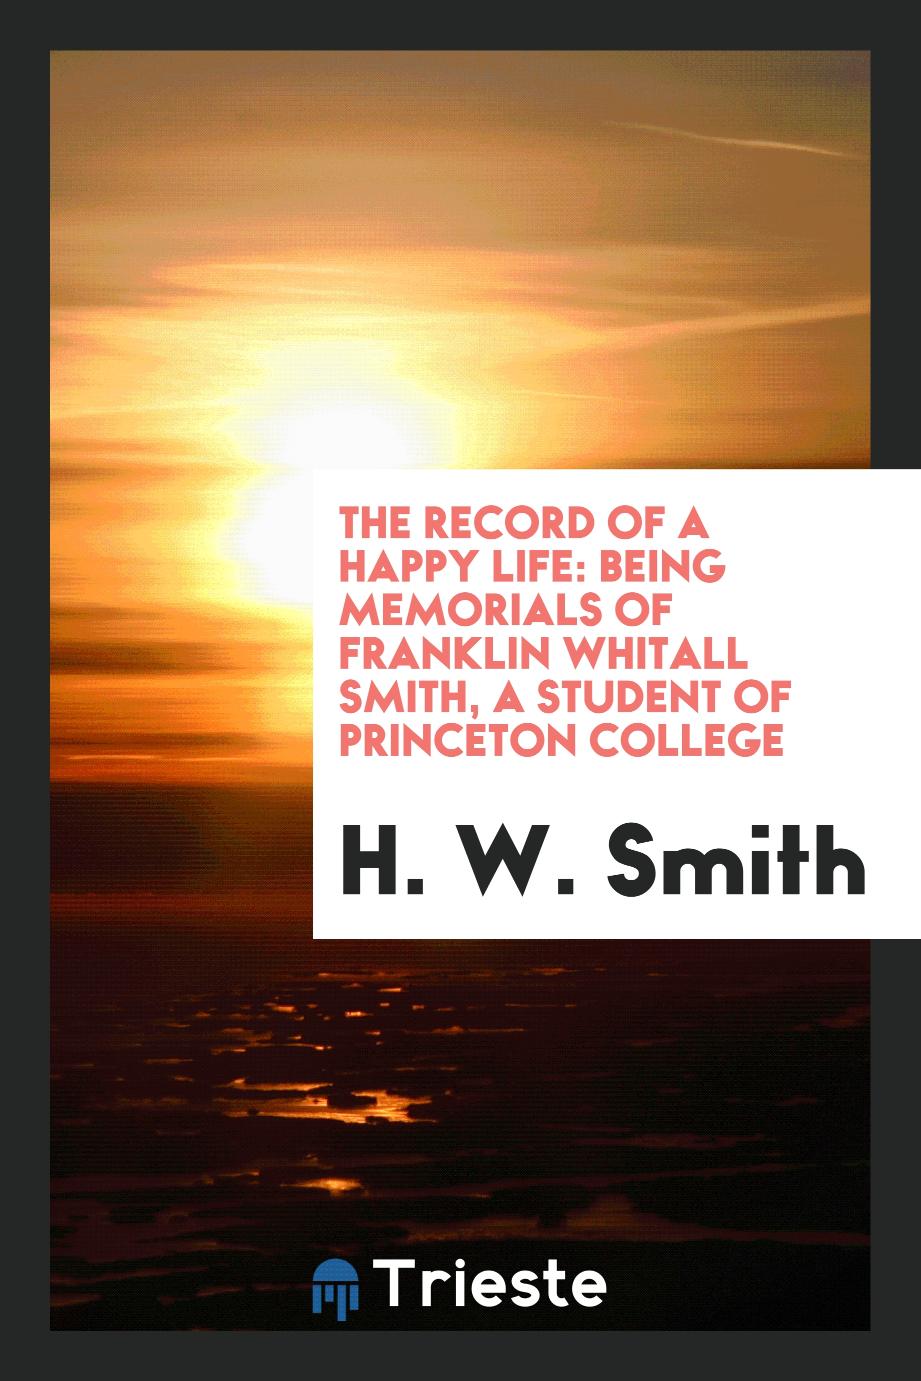 The Record of a Happy Life: Being Memorials of Franklin Whitall Smith, a Student of Princeton College